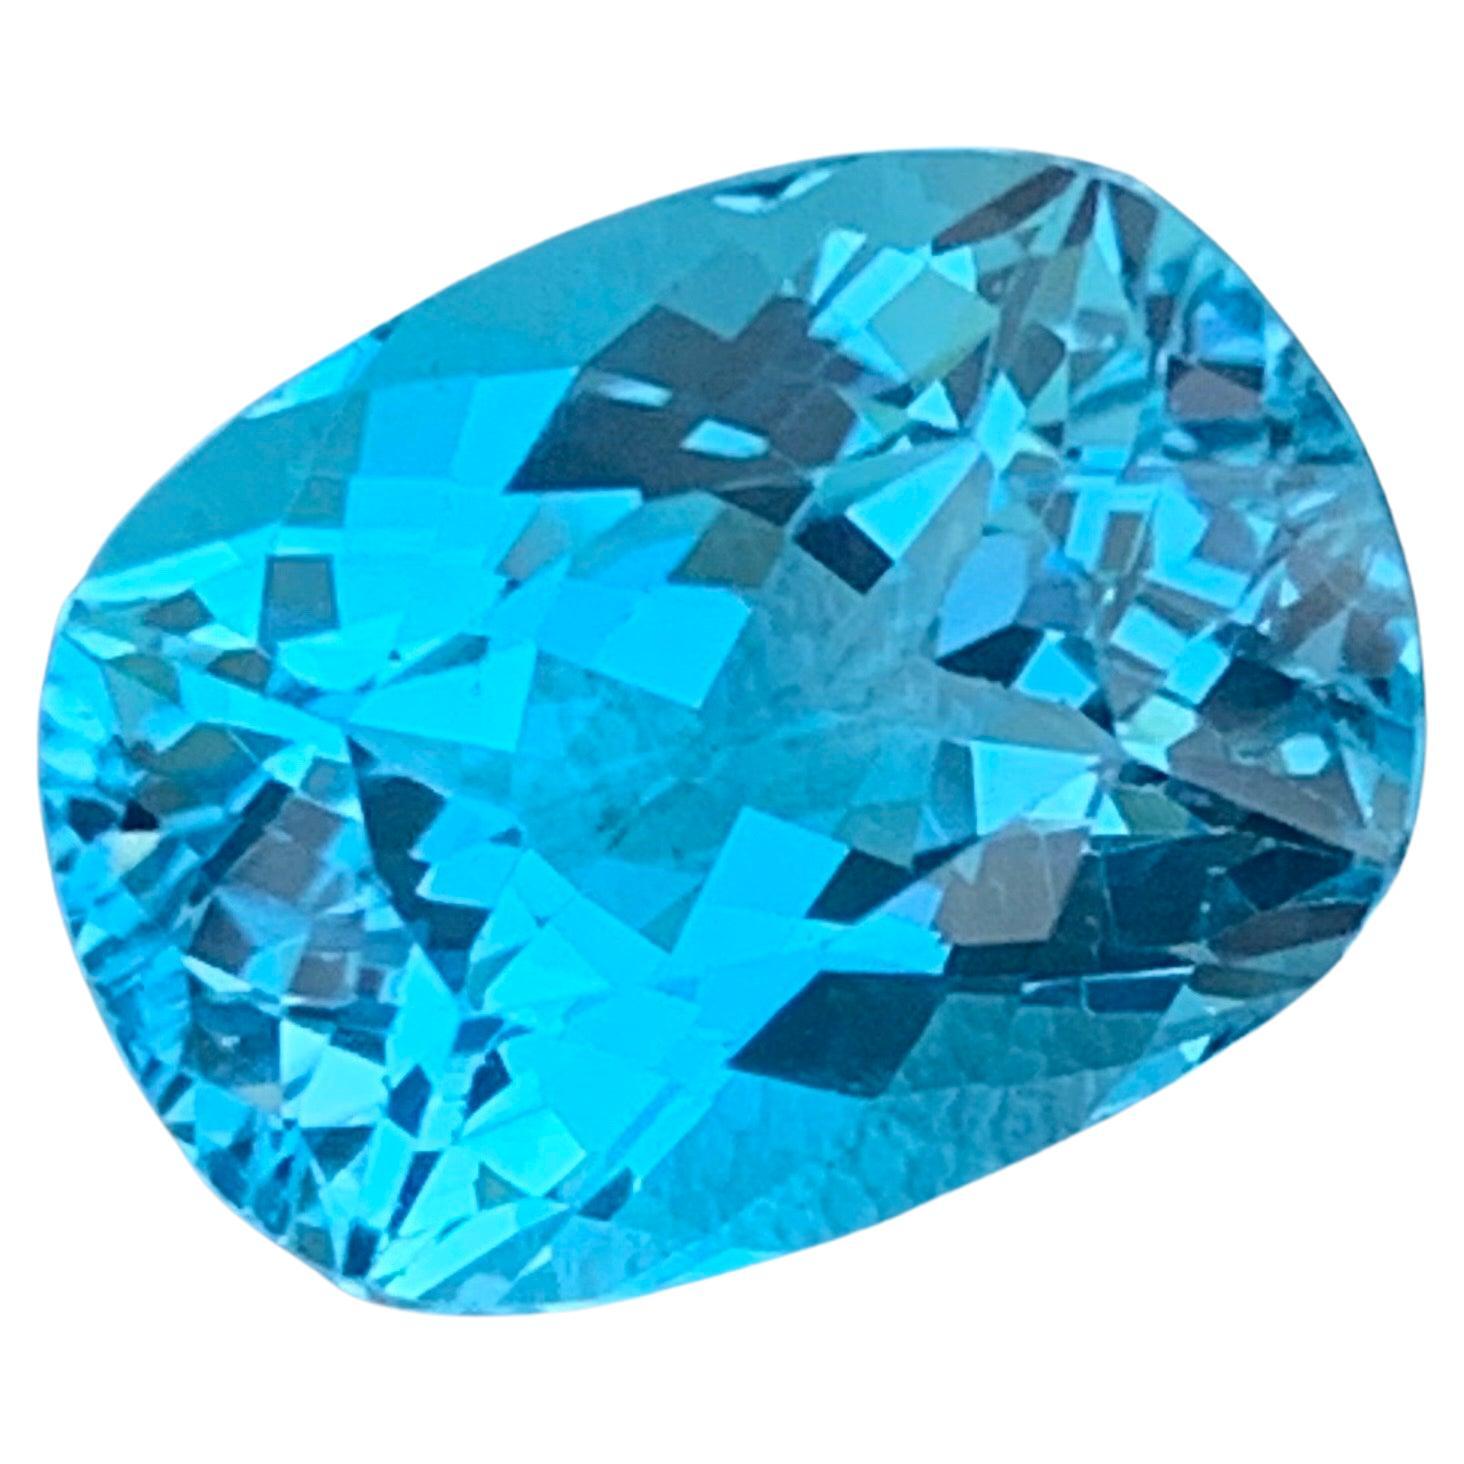 12.20 Cts Loose Sky Blue Topaz Gemstone from Brazil For Sale